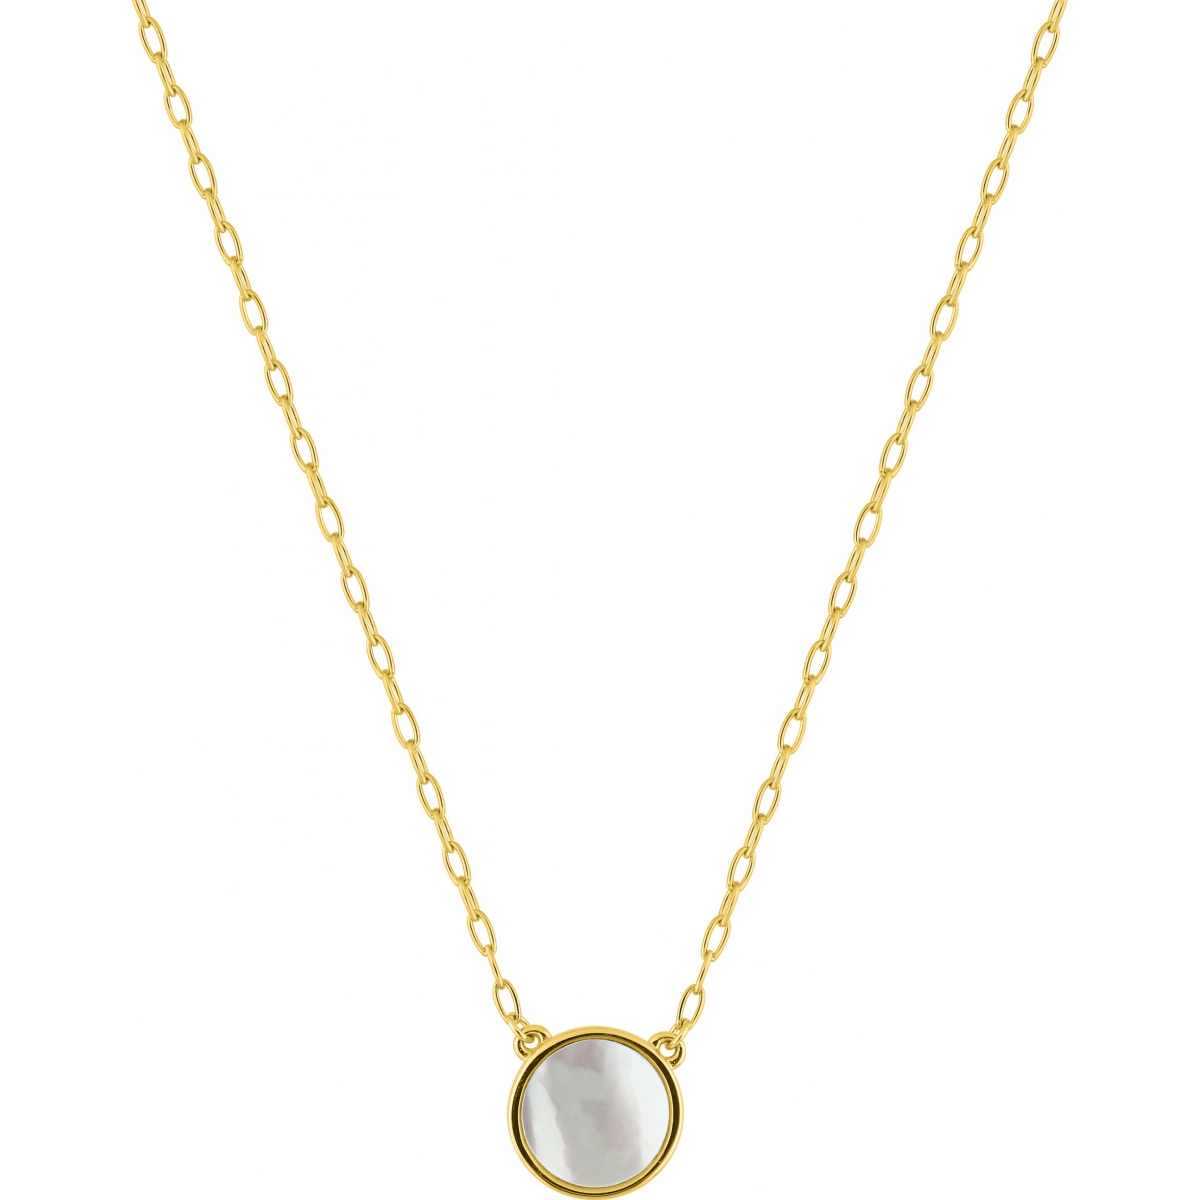 Necklace w. mother of pearl 9K YG Lua Blanca  410639.89 